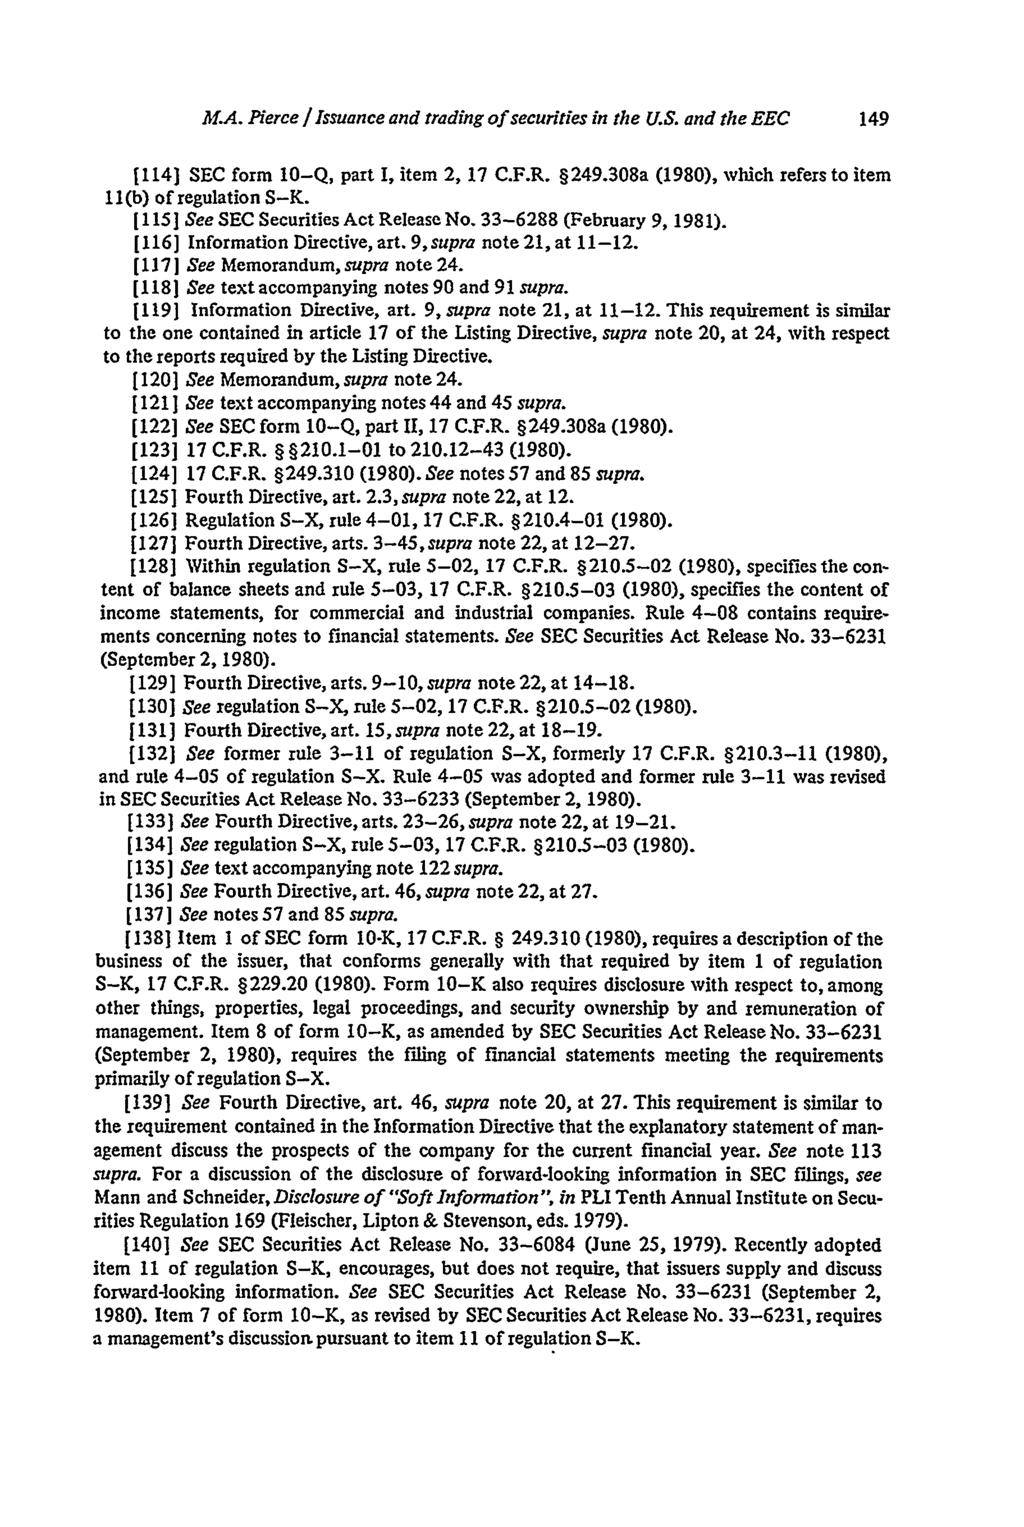 Pierce: The Regulation of the Issuance and Trading of Securities in the U M.A. Pierce / Issuance and trading of securities in the U.S. and the EEC 1114] SEC form 10-Q, part I, item 2, 17 C.F.R. 249.